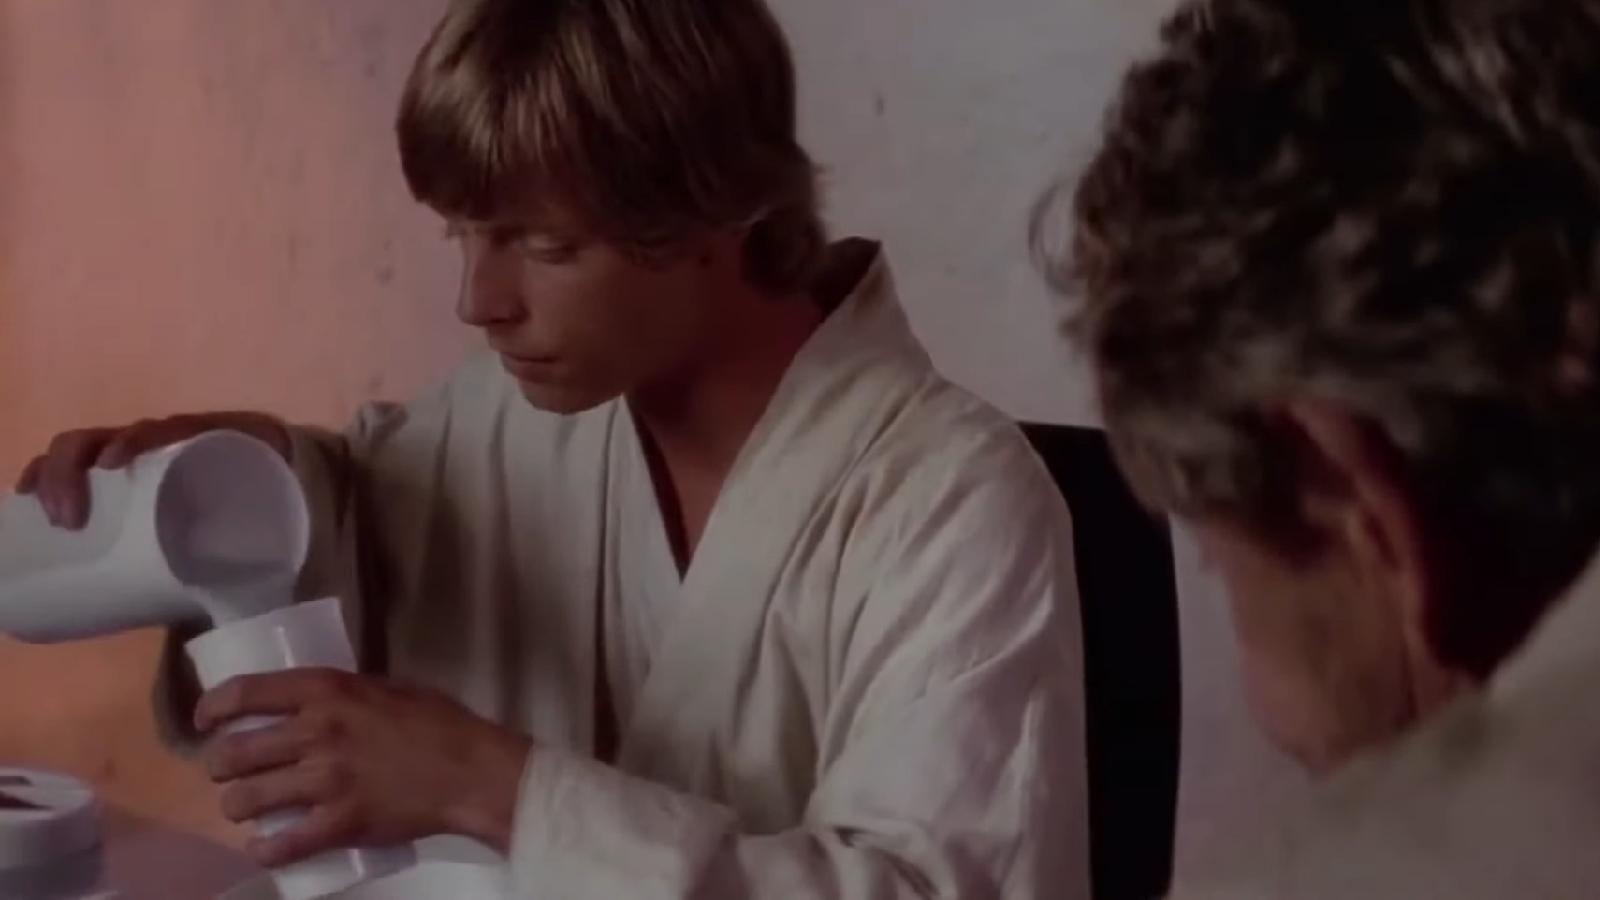 Blue Milk's first appearance in Star Wars